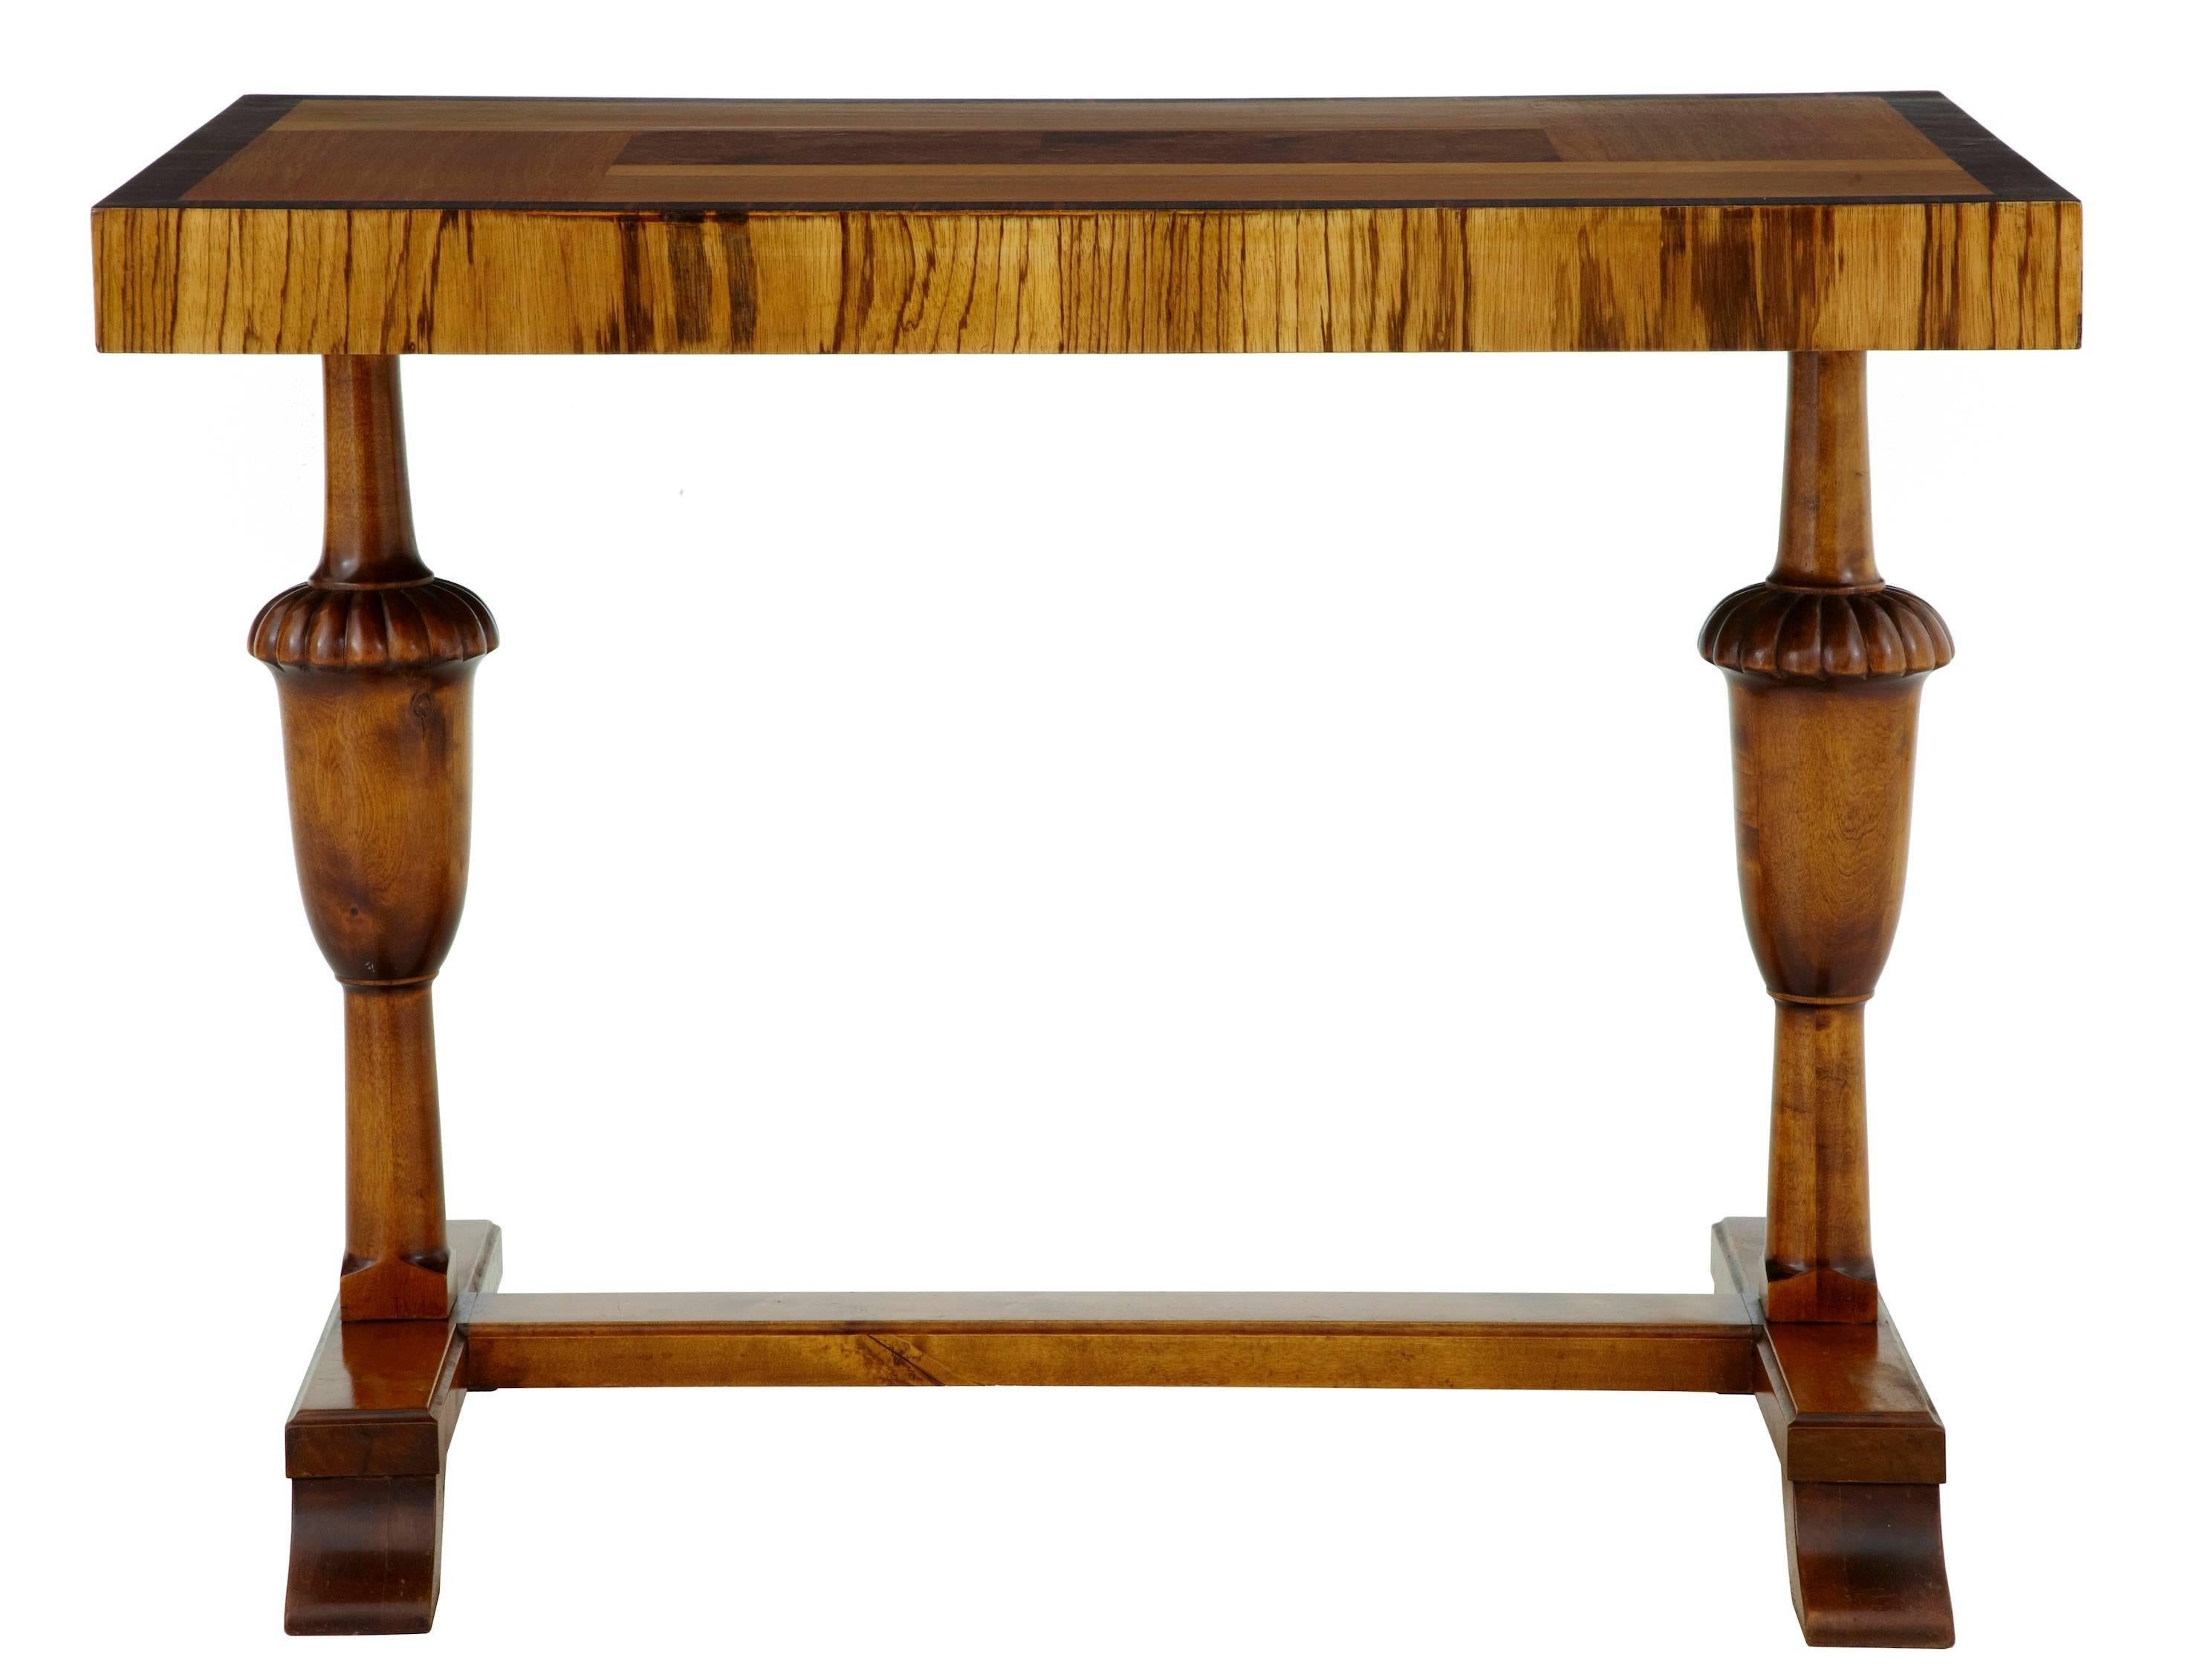 Birch inlaid occasional table, circa 1930.
Multi possible uses for this table.
Birch elm and rosewood veneers used to create this striking table.
Baluster support legs, united by stretcher.

Minor veneer losses to sides.

Height: 27